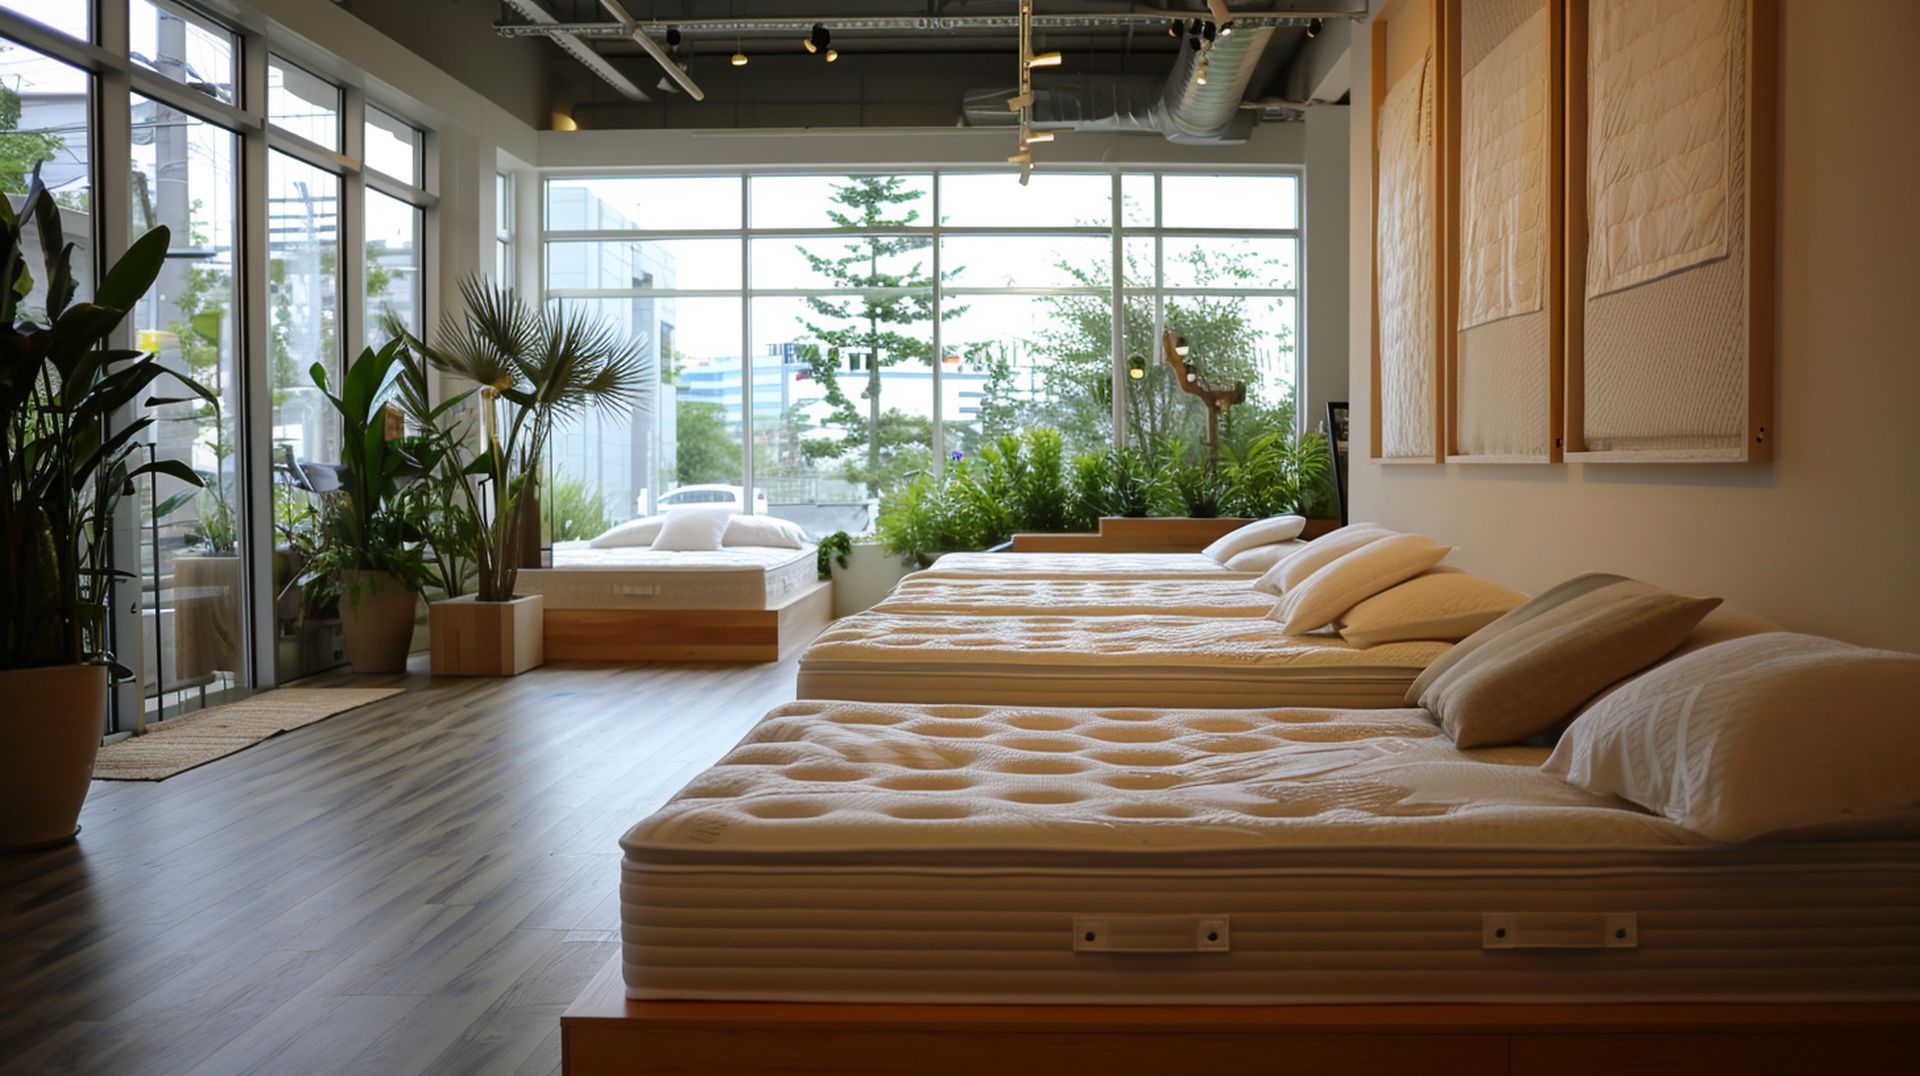 Types of mattresses at mattress dealers in Quincy, MA